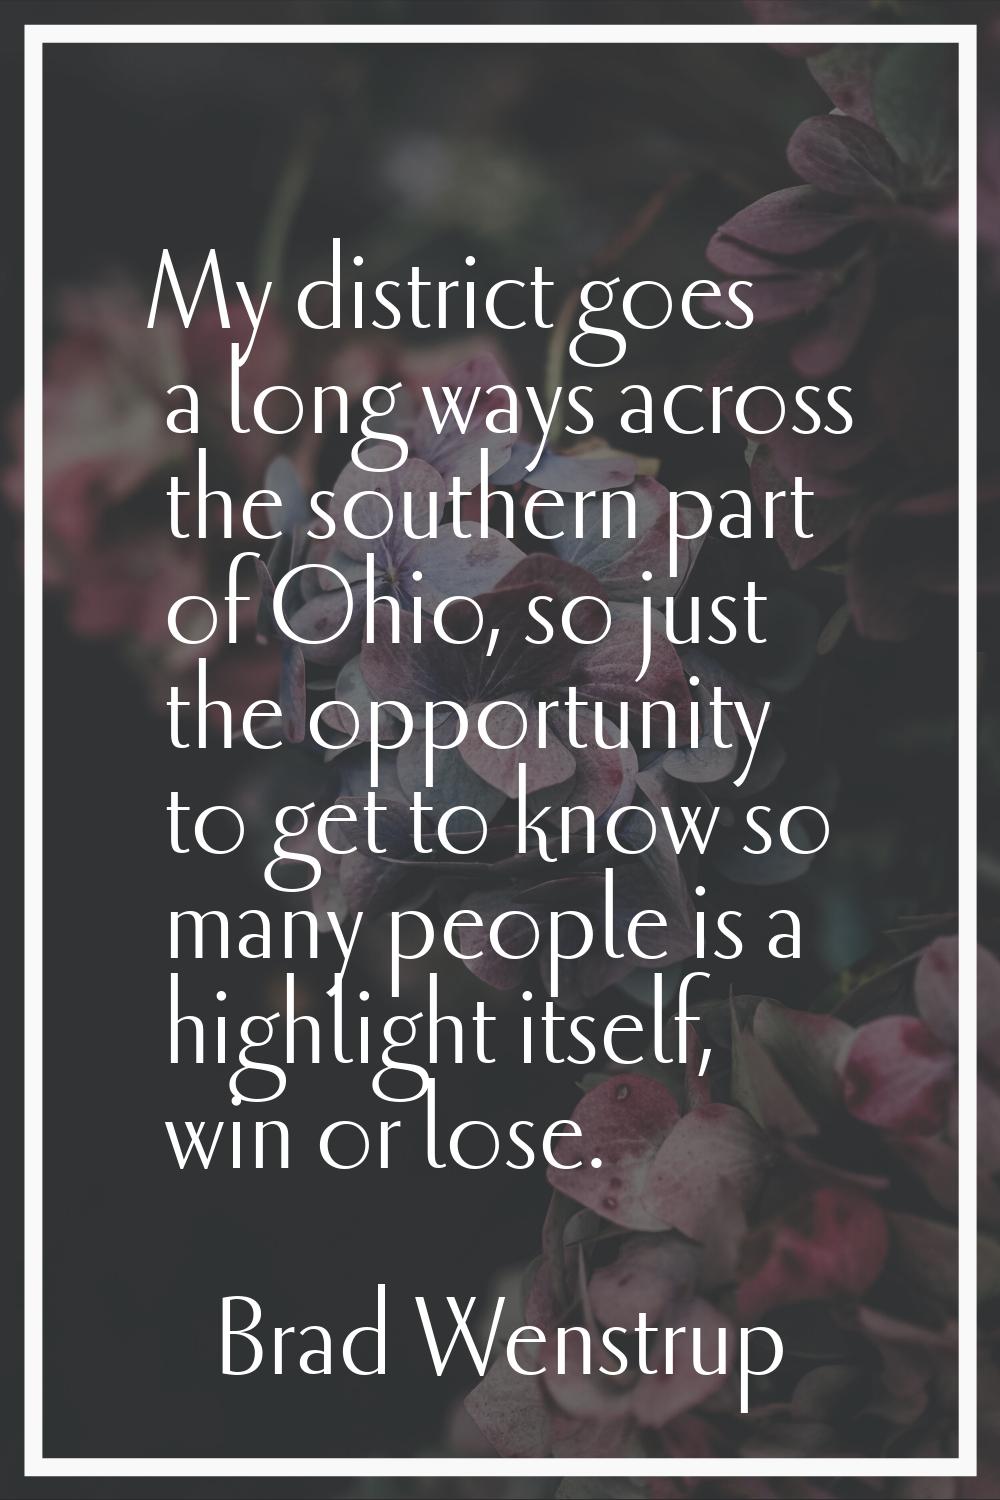 My district goes a long ways across the southern part of Ohio, so just the opportunity to get to kn